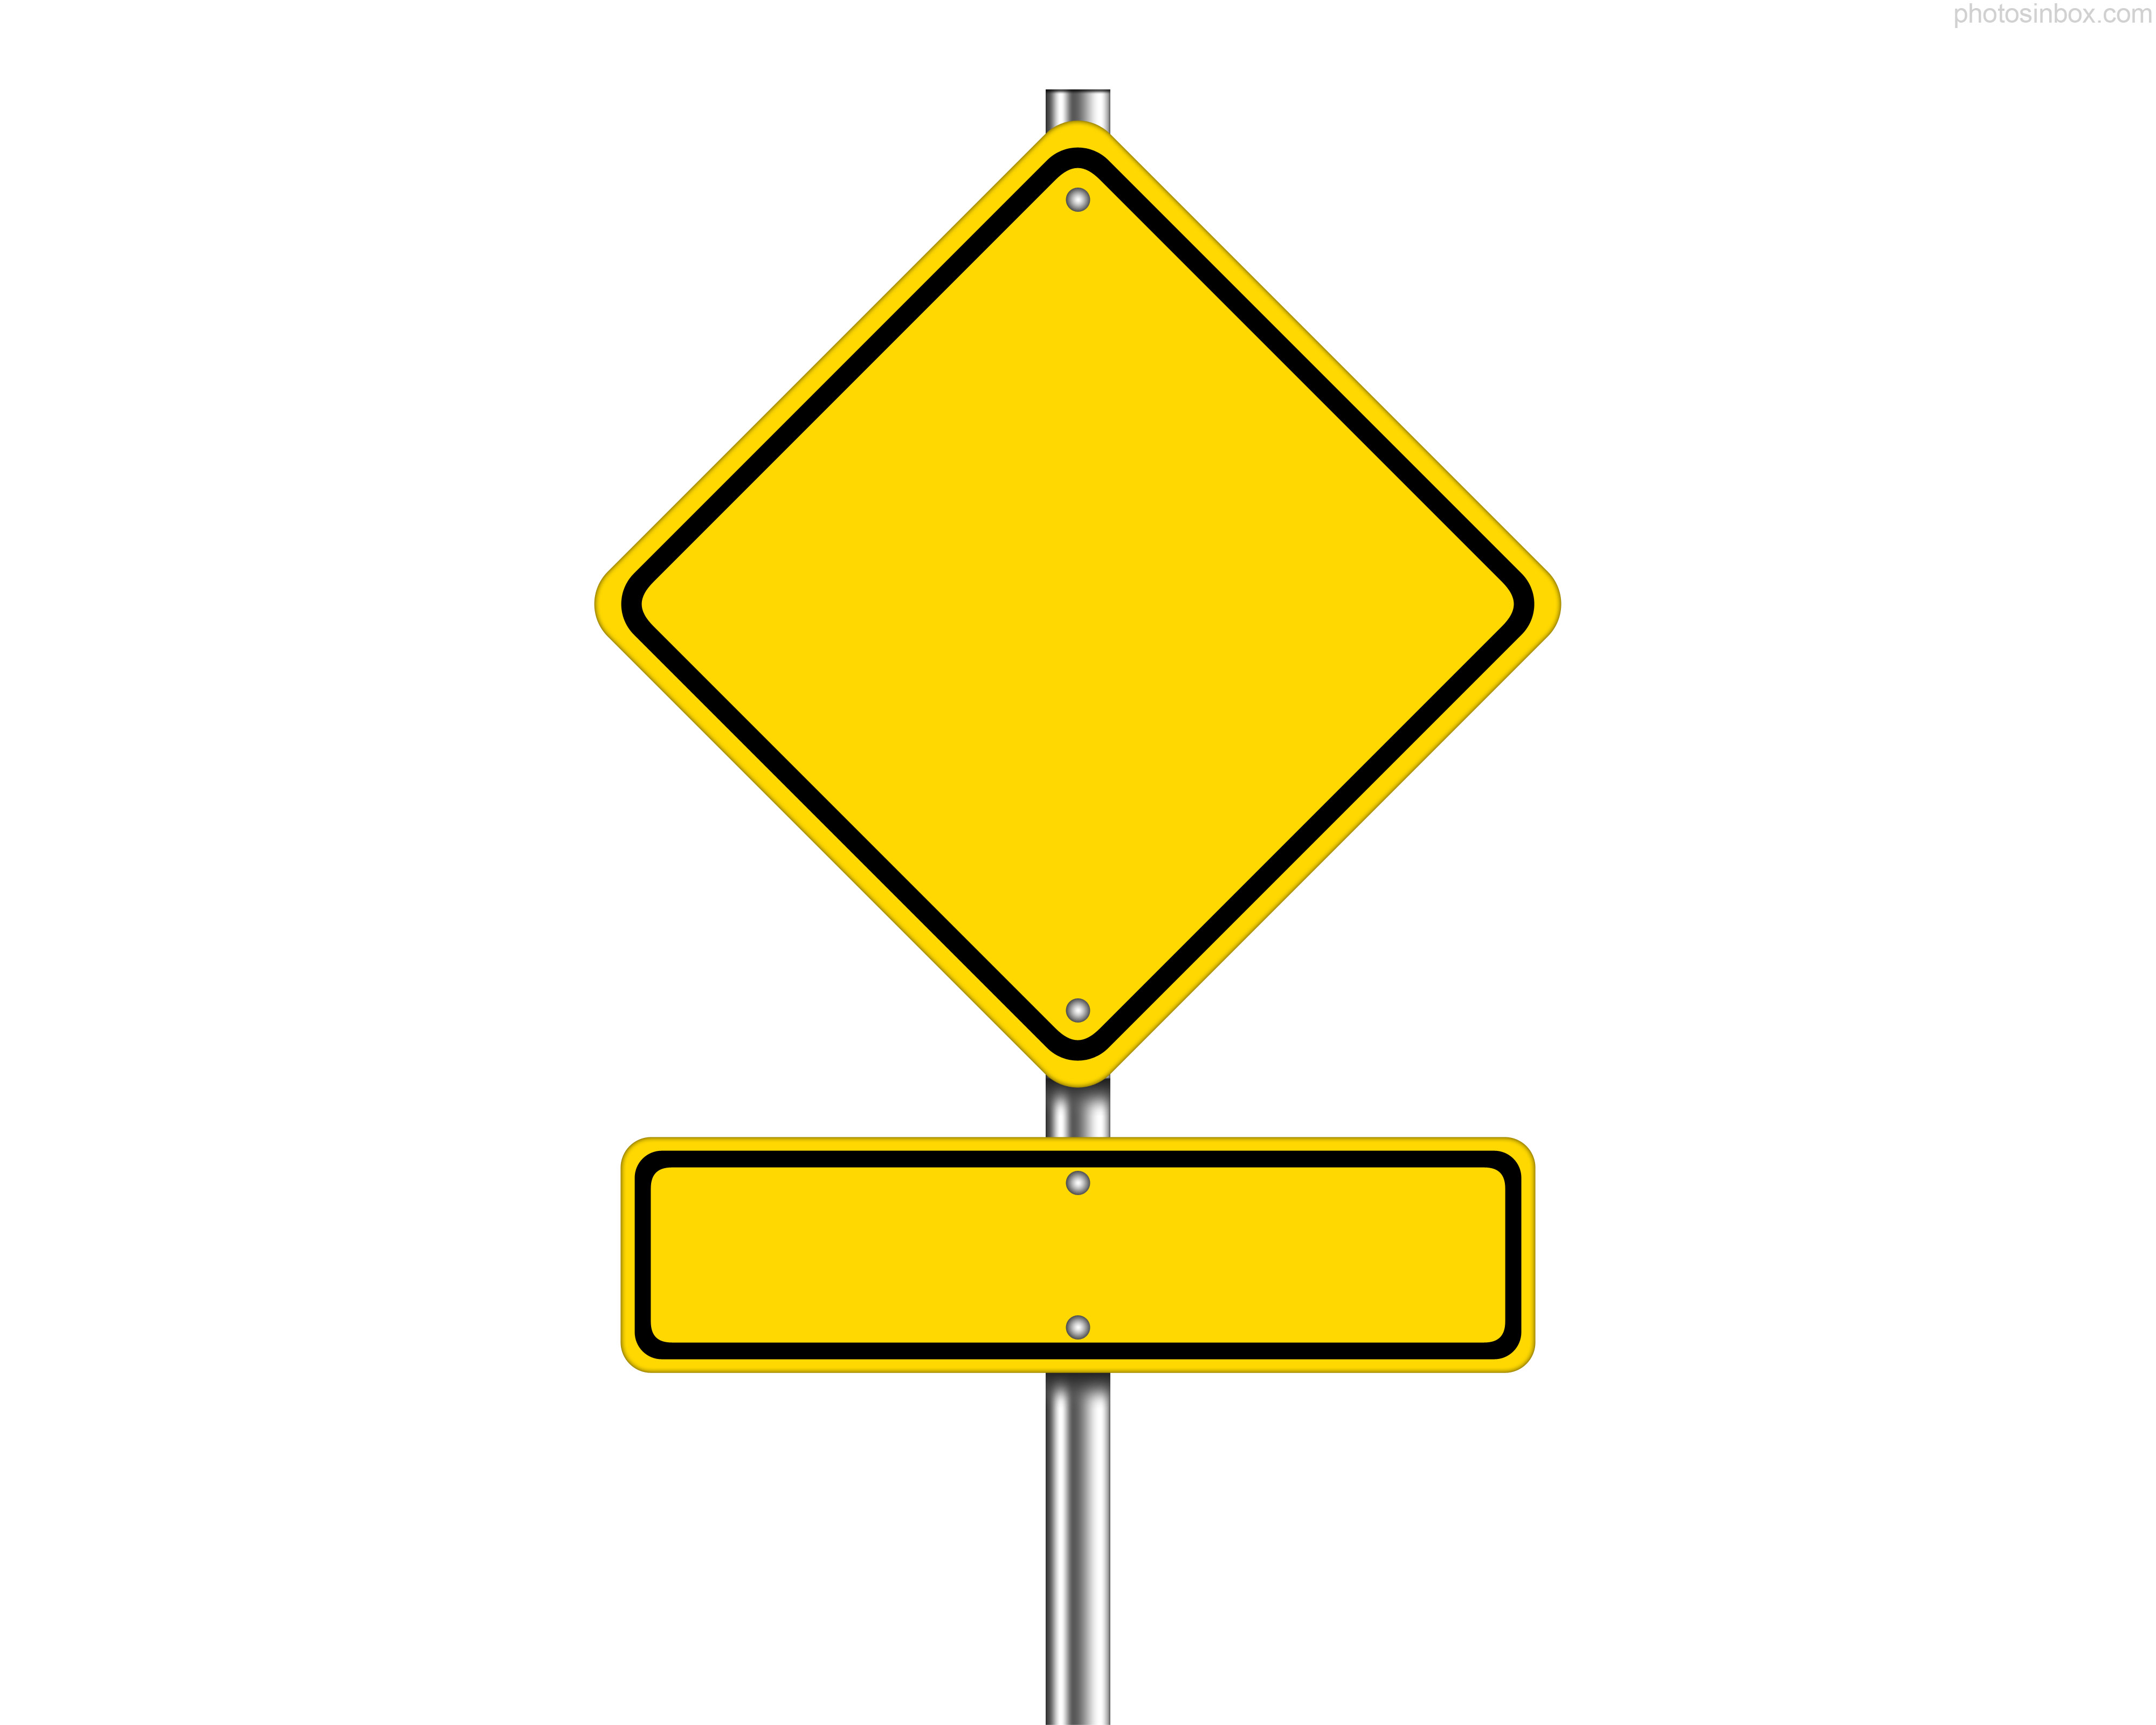 Free Images Of Road Signs, Download Free Images Of Road Signs png ...